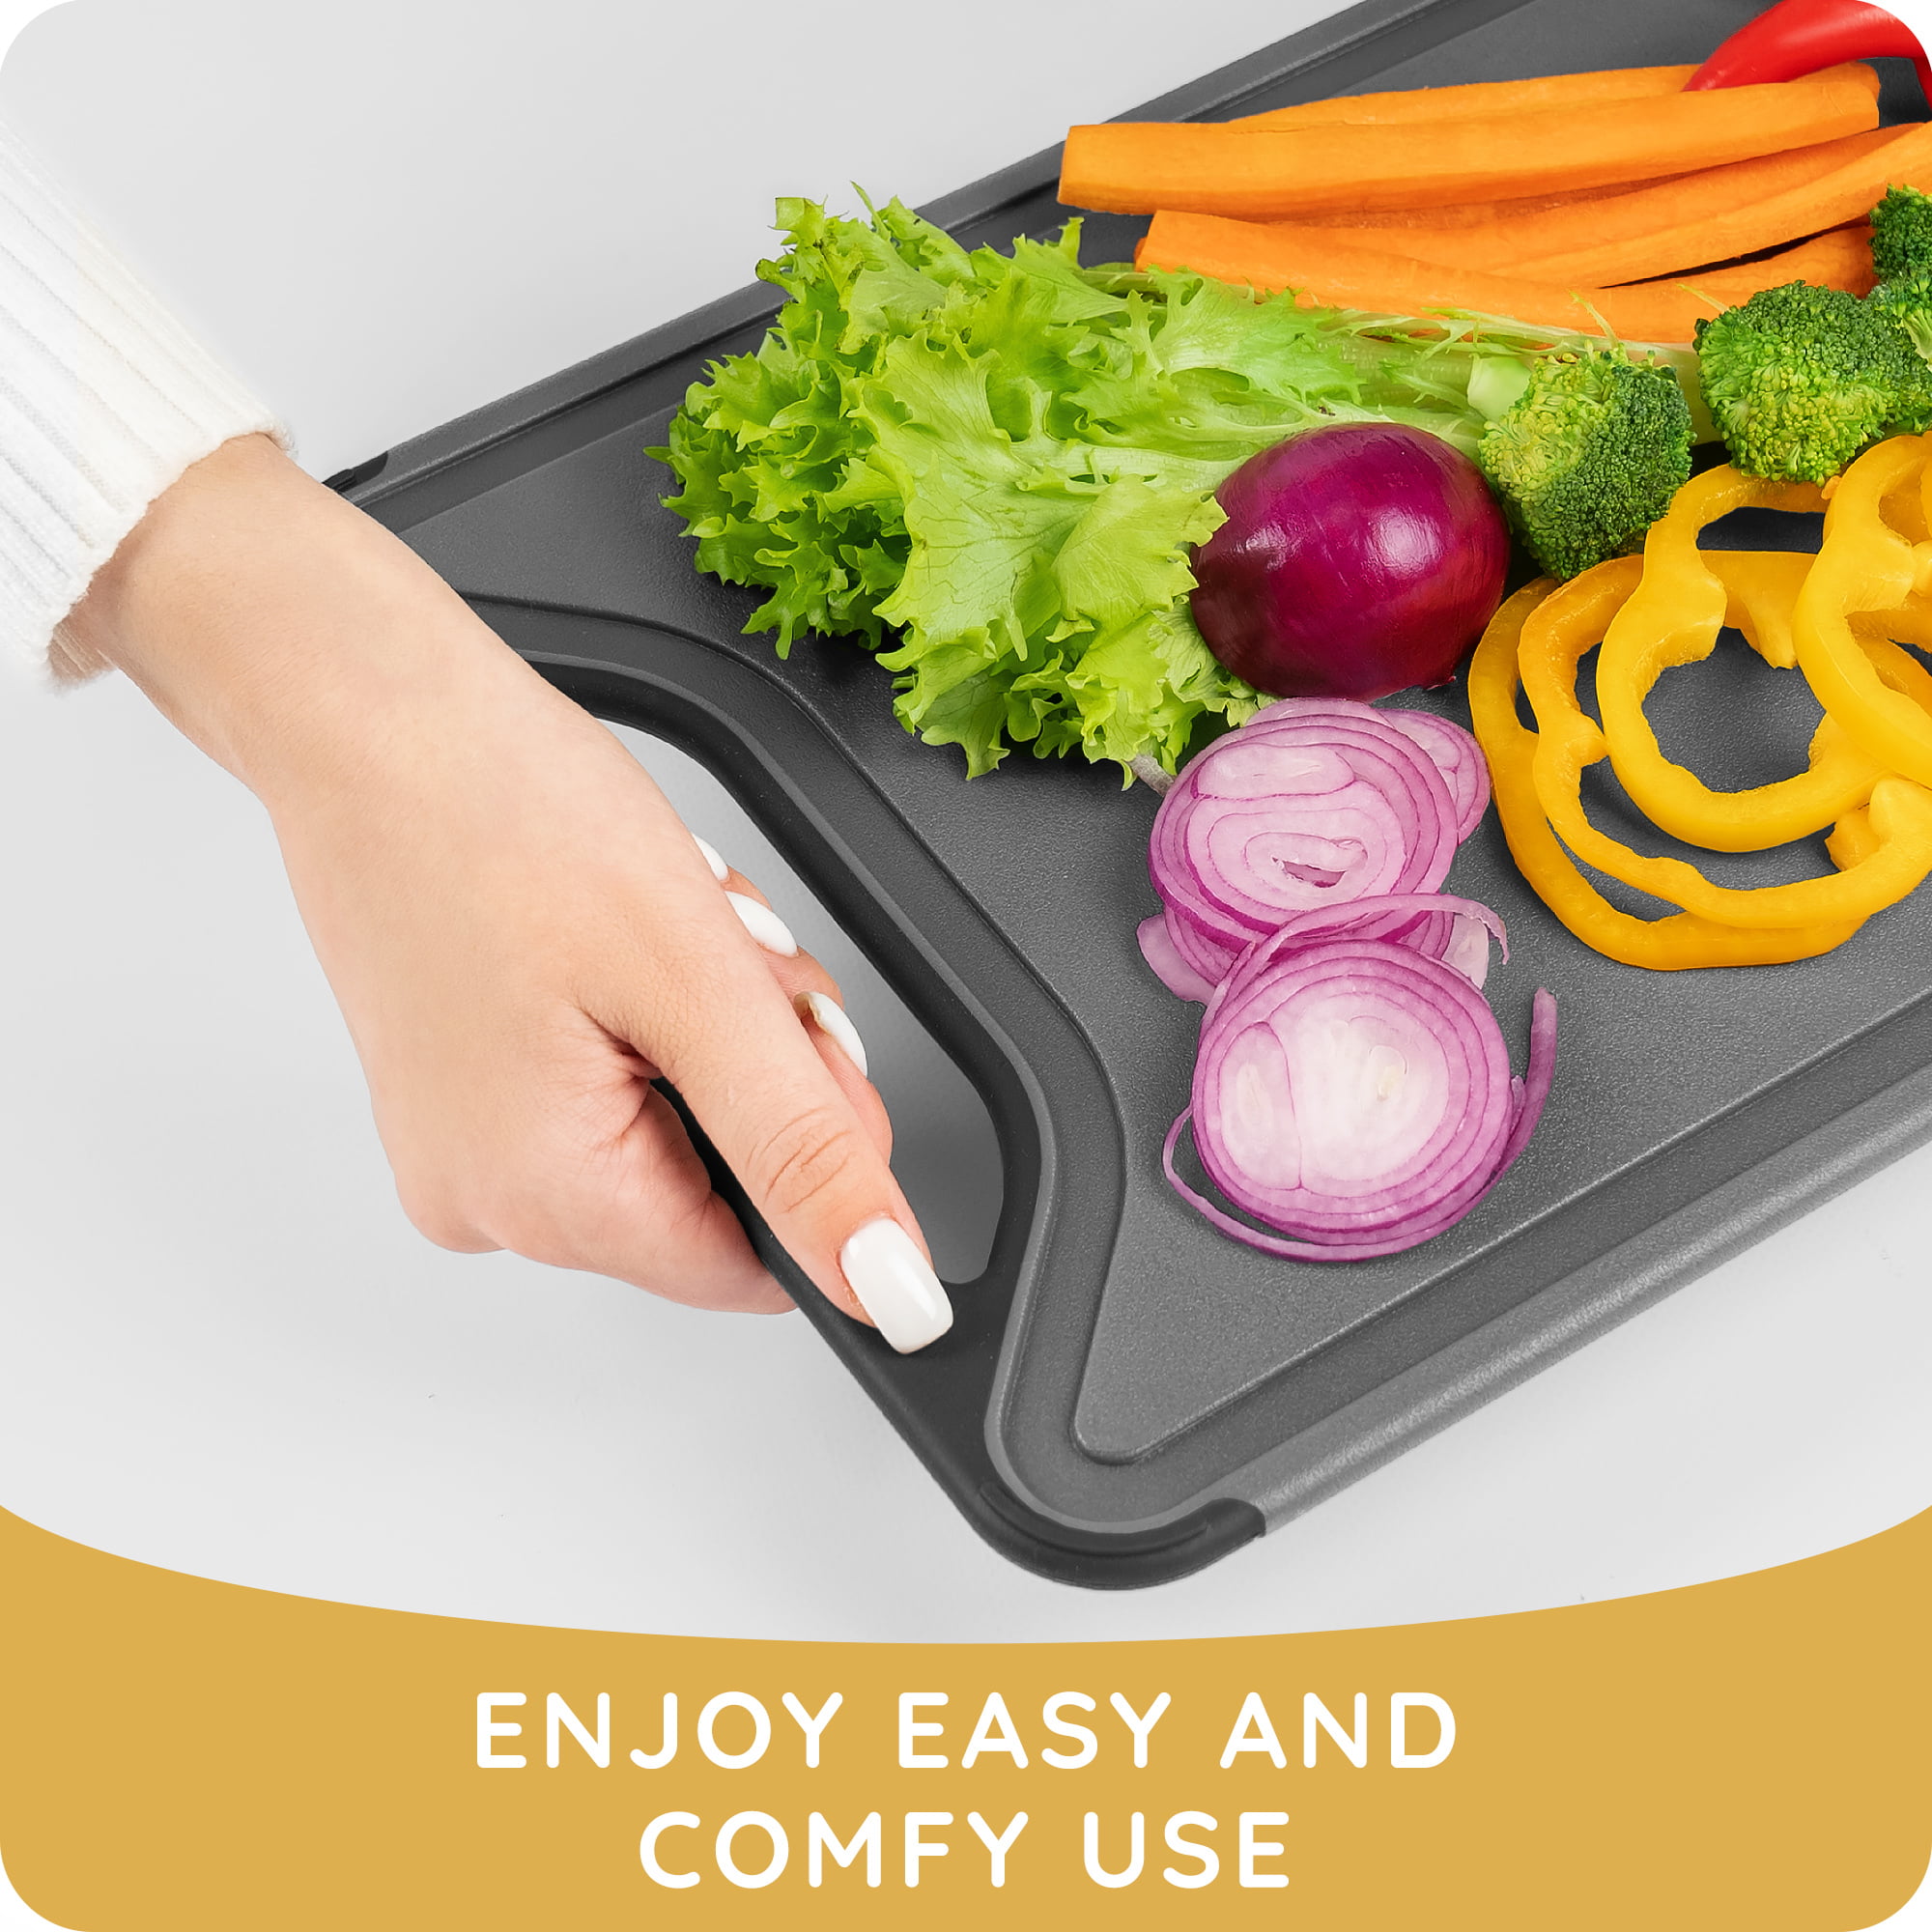 Palaxe Plastic Cutting Boards pro Non-slip with Silicon Feet, Dishwasher  Safe Chopping Boards, Grip Handle, Rubber, Easy to Clean for Kitchen,  family